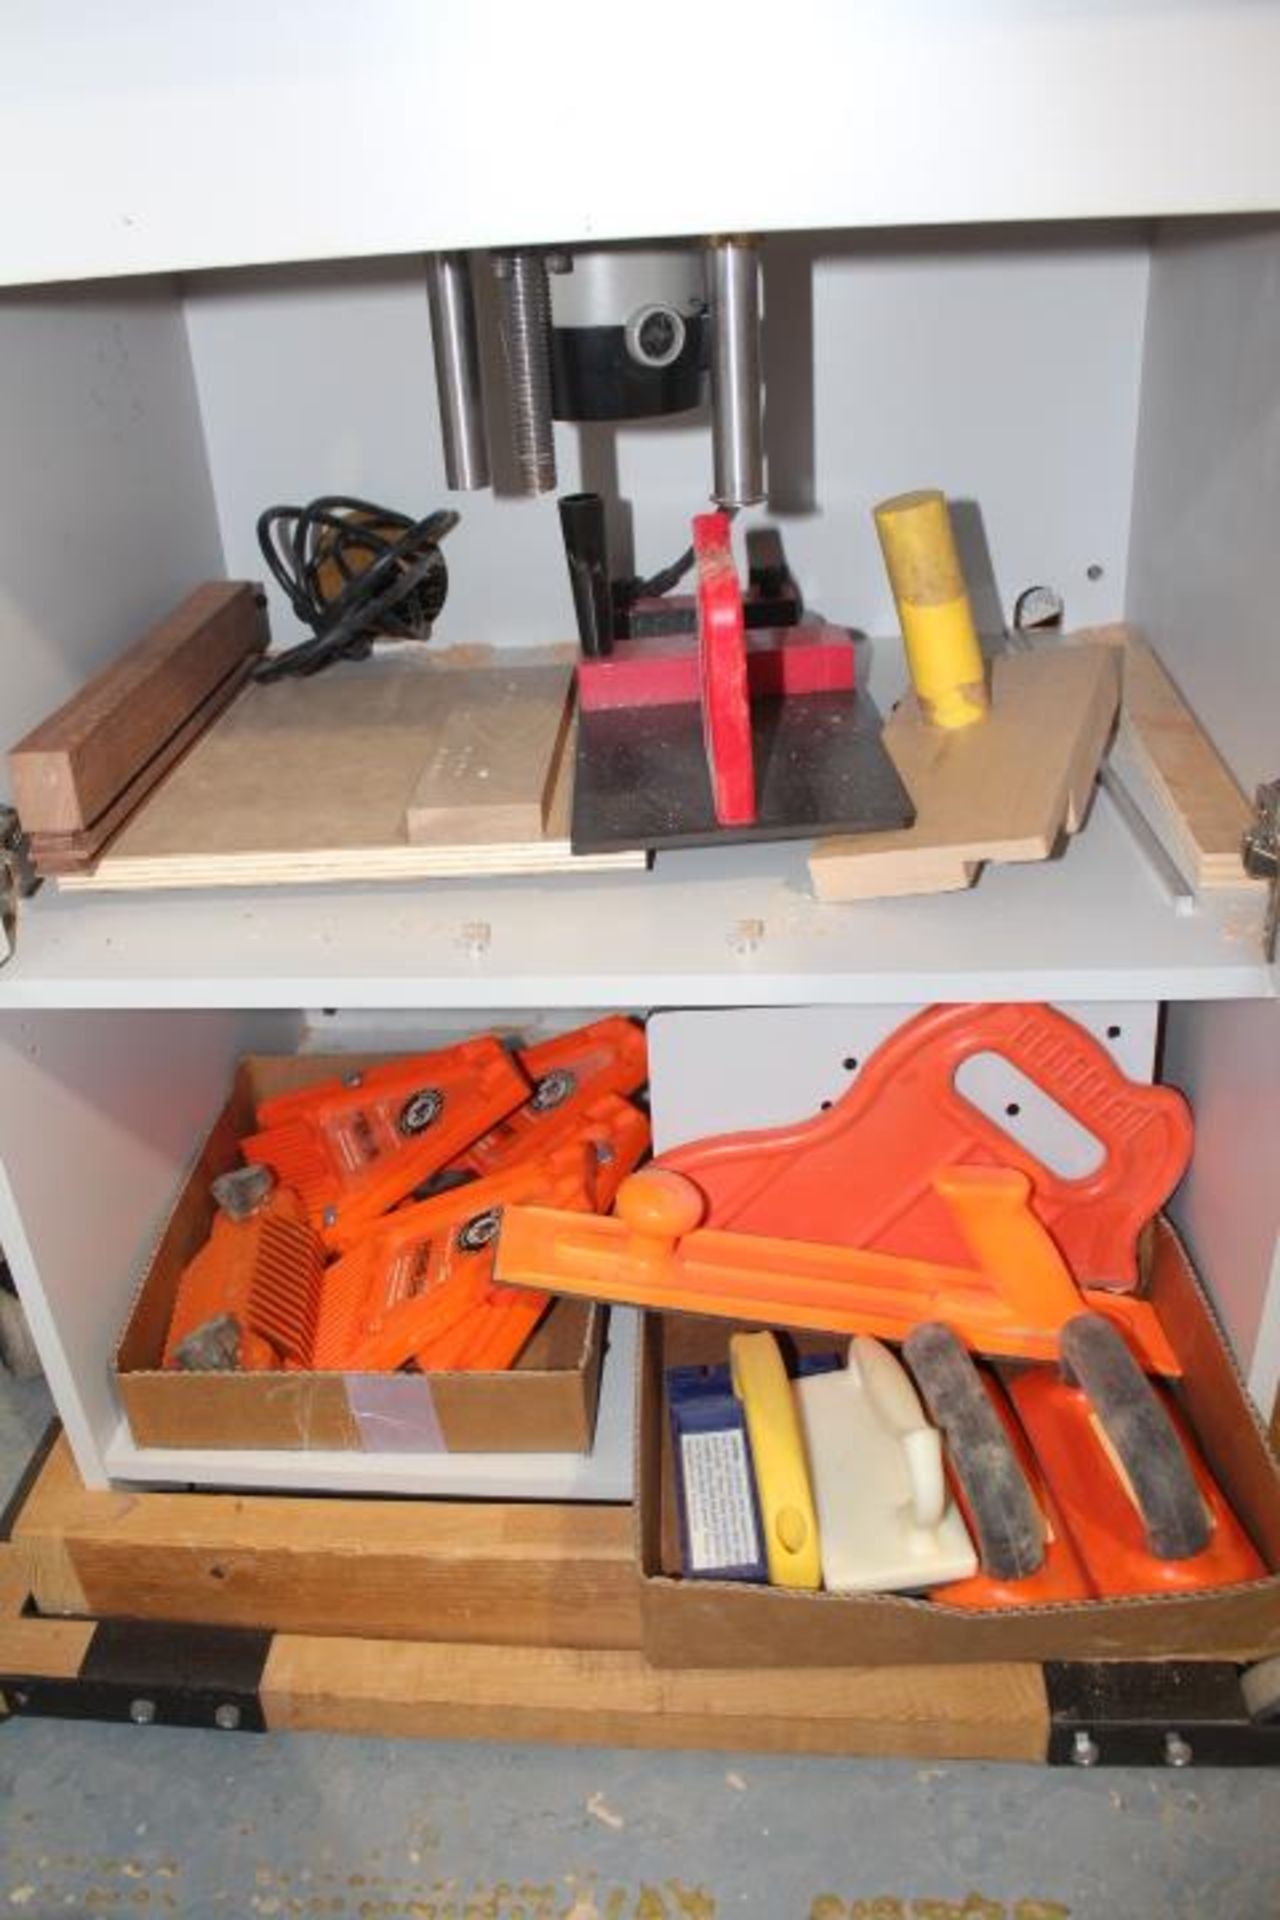 BENCH DOG ROUTER CABINET, PORTER CABLE ROUTER WITH TABLE/CABINET, ACCESSORIES AND DOLLY - Image 3 of 3